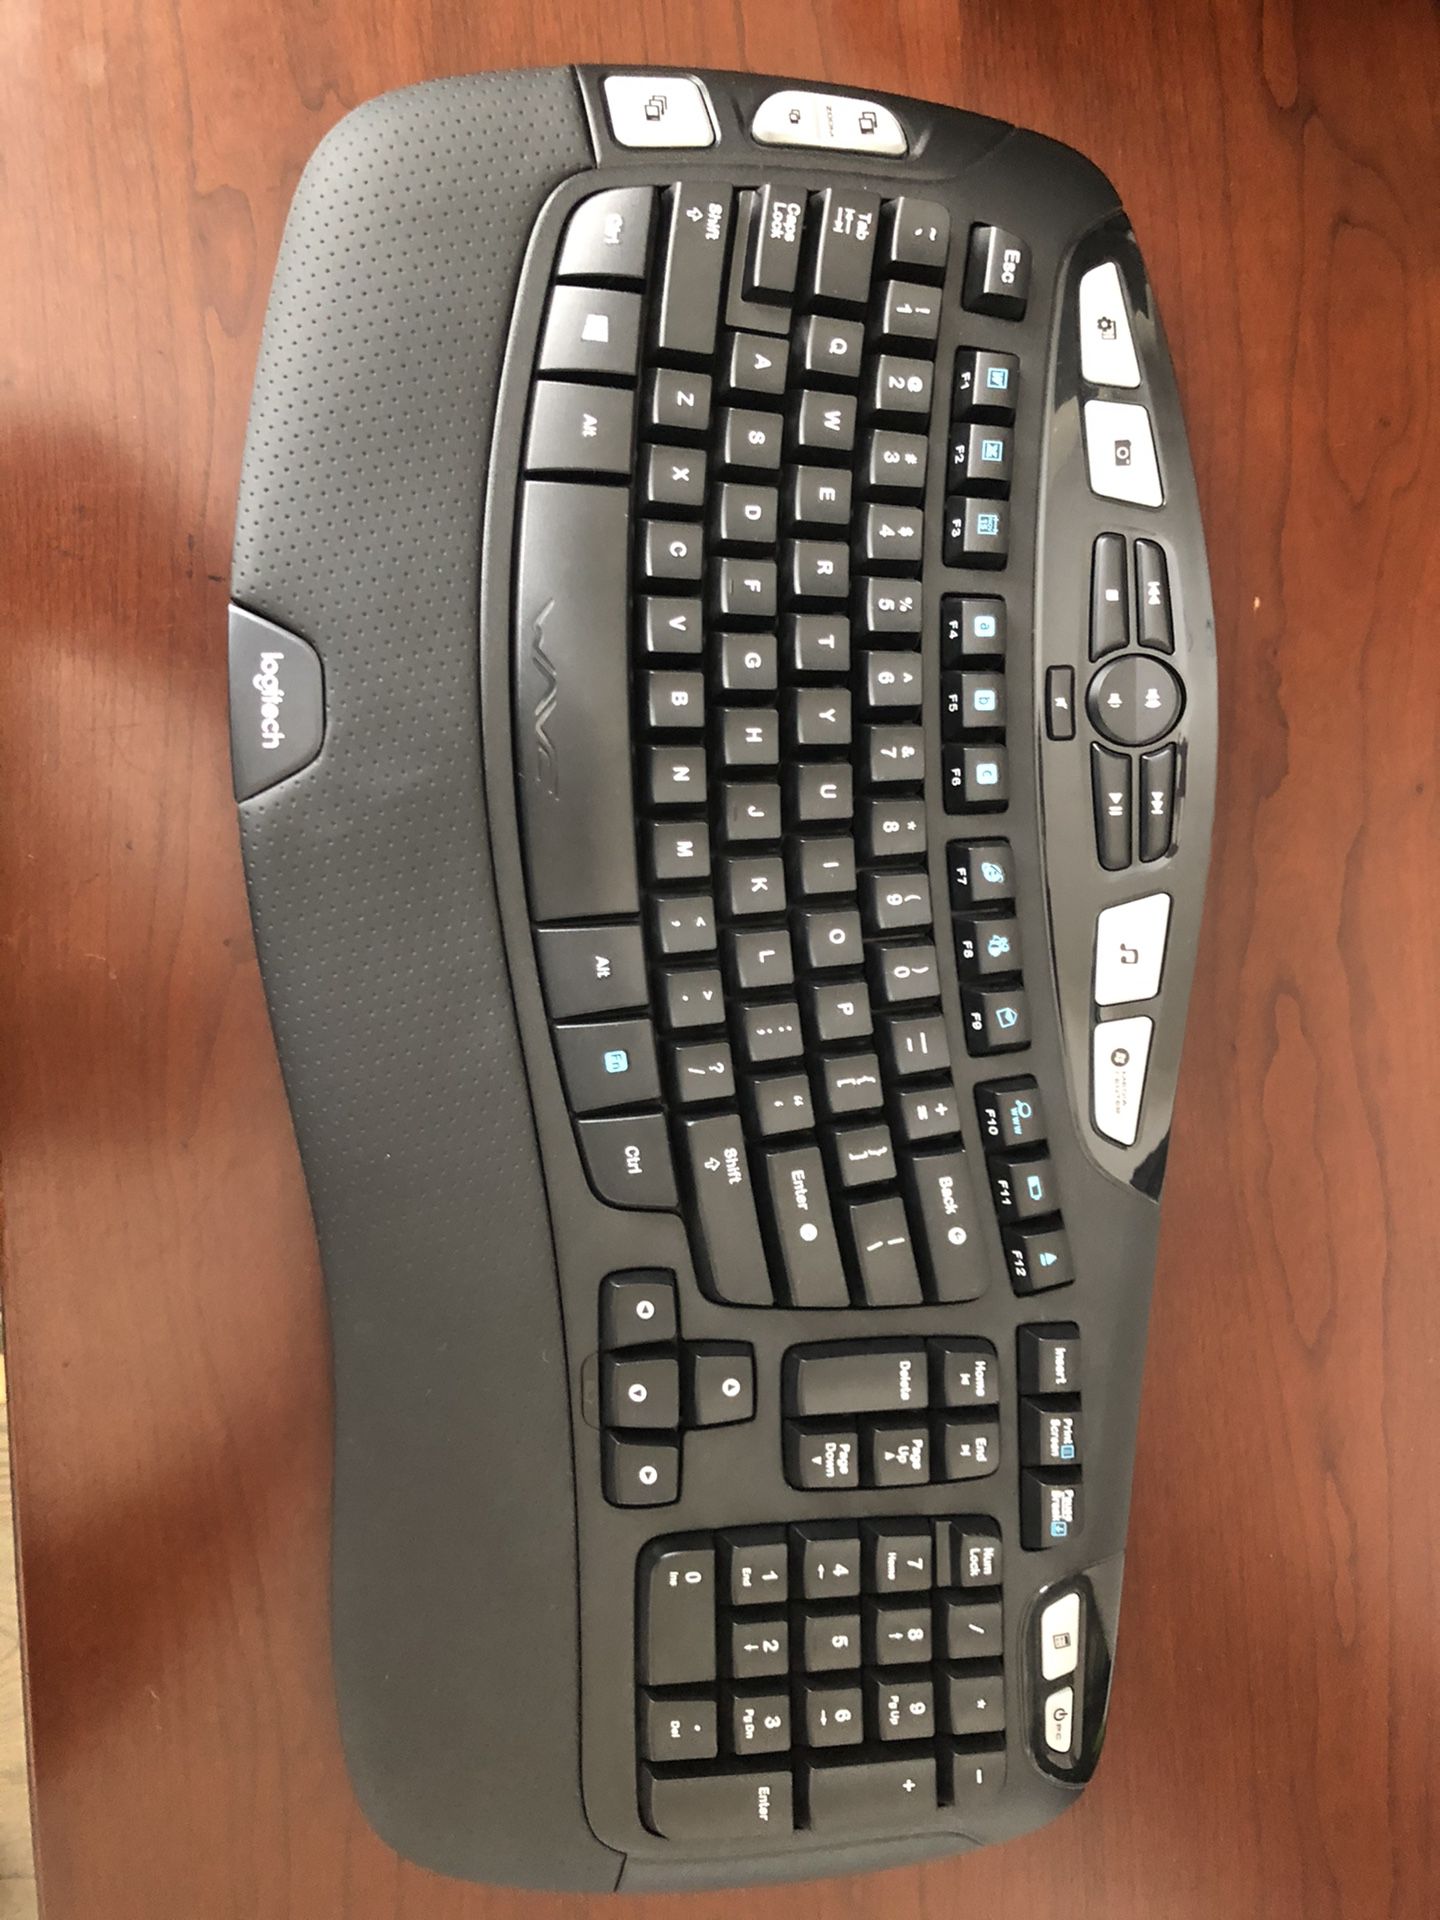 Wireless keyboard and wireless arc touch mouse